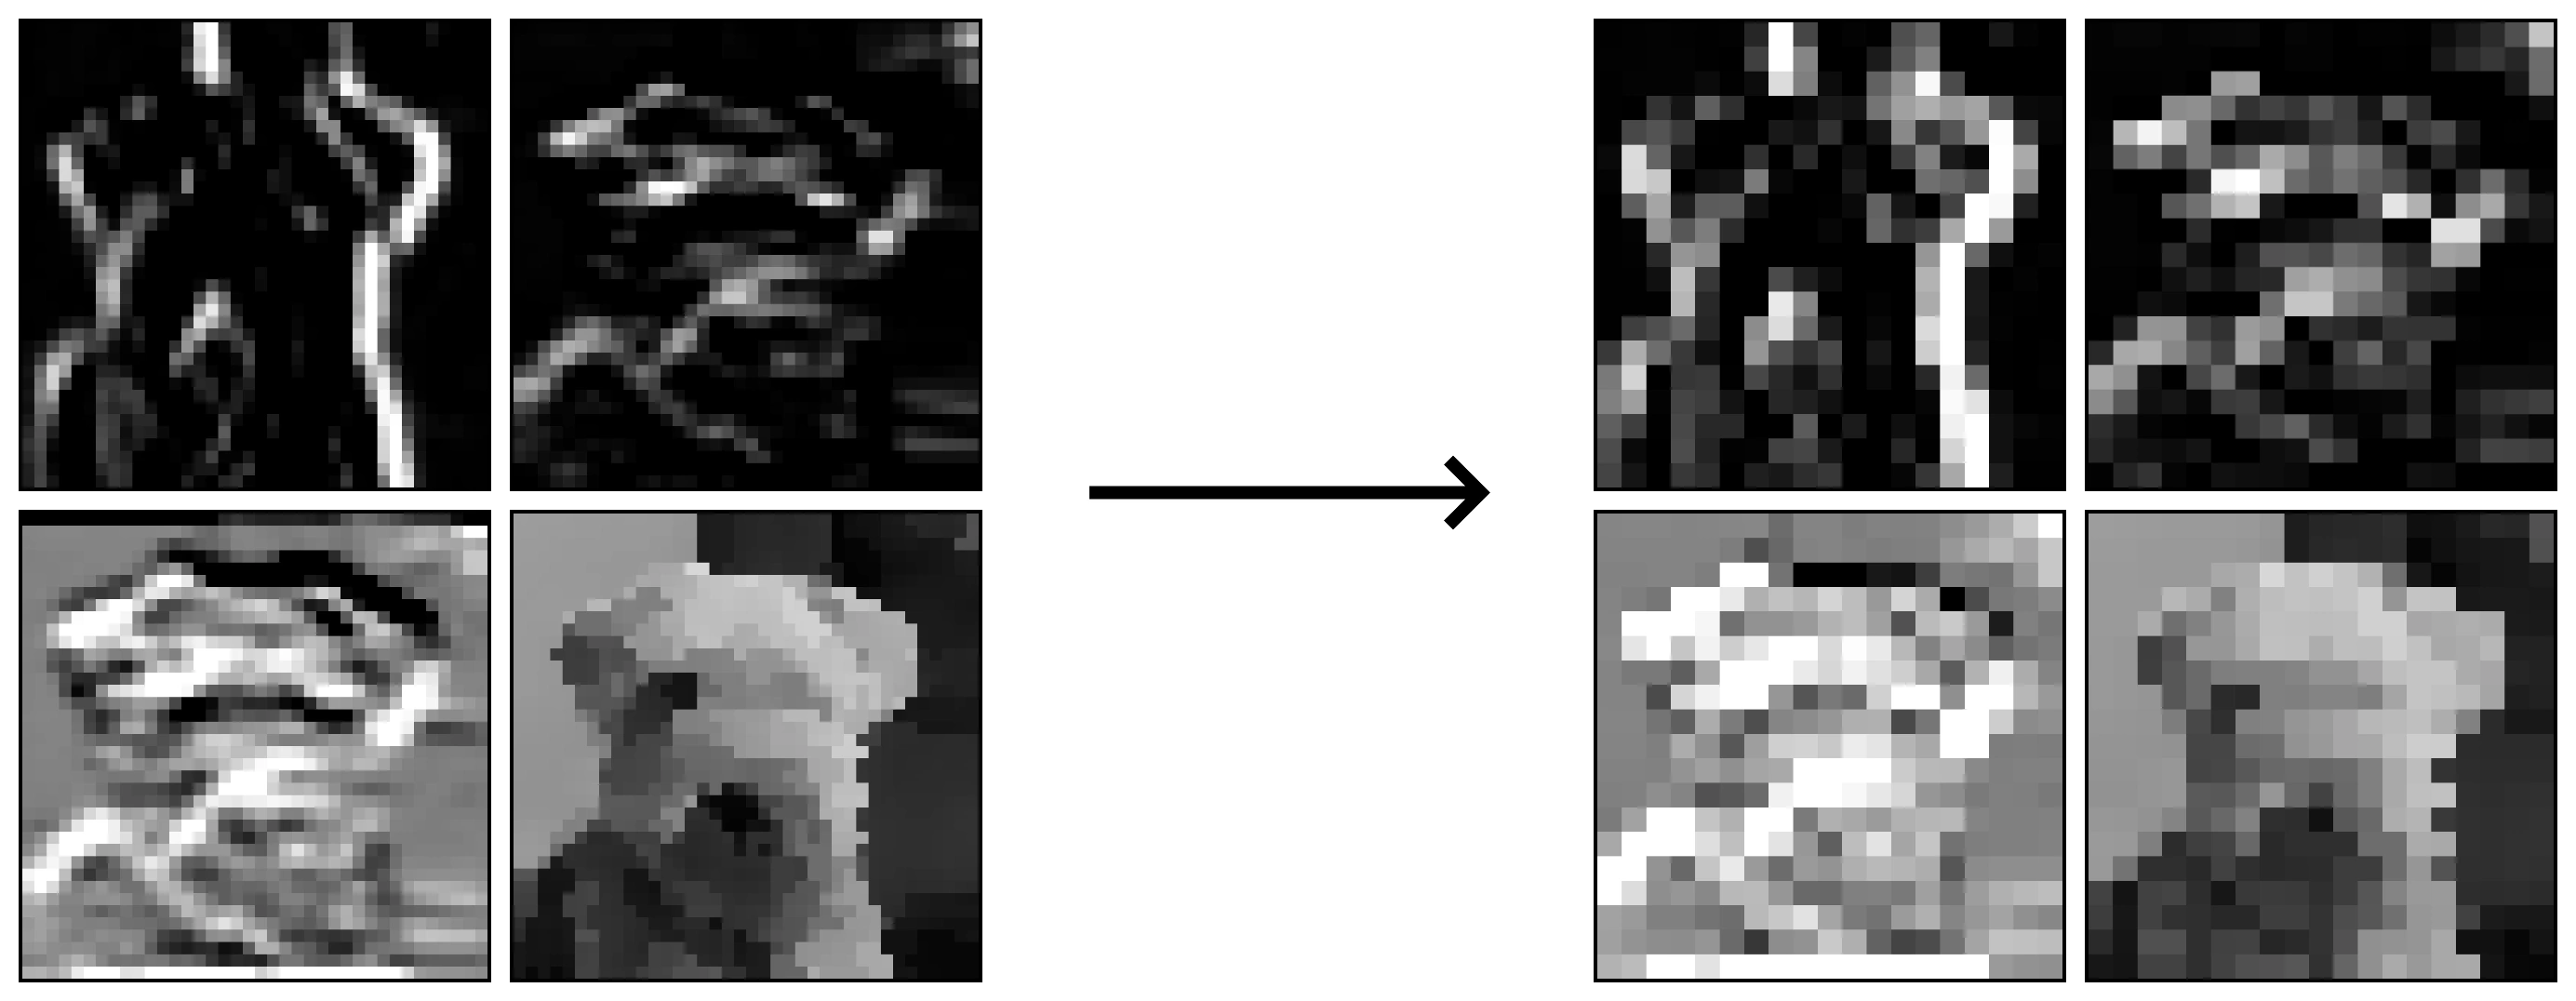 Max pooling applied to four example images